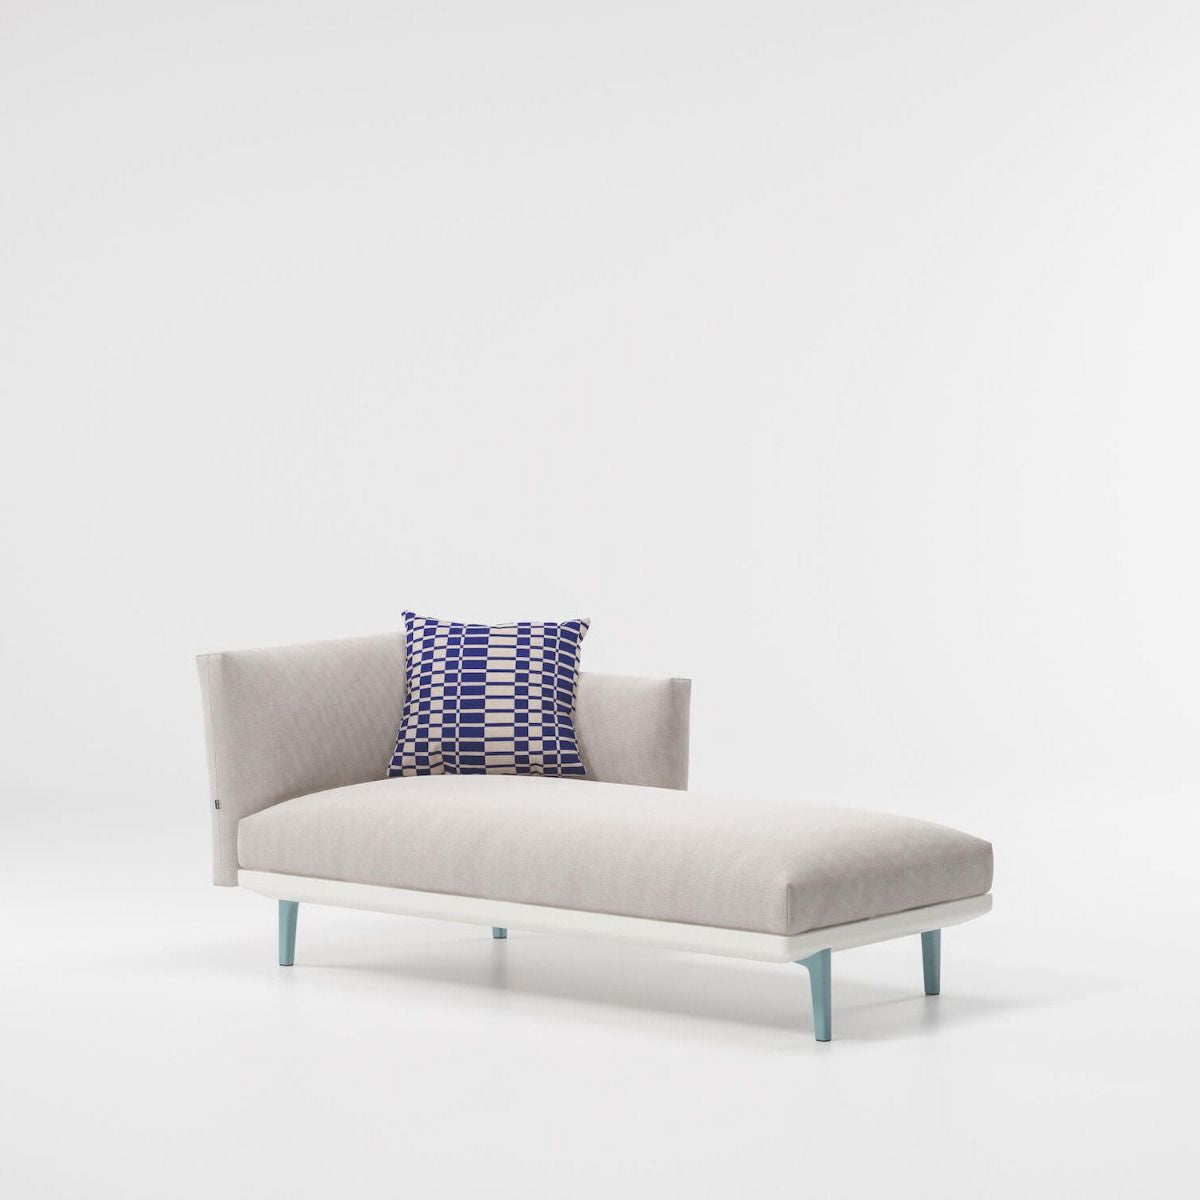 Kettal Boma Left Daybed